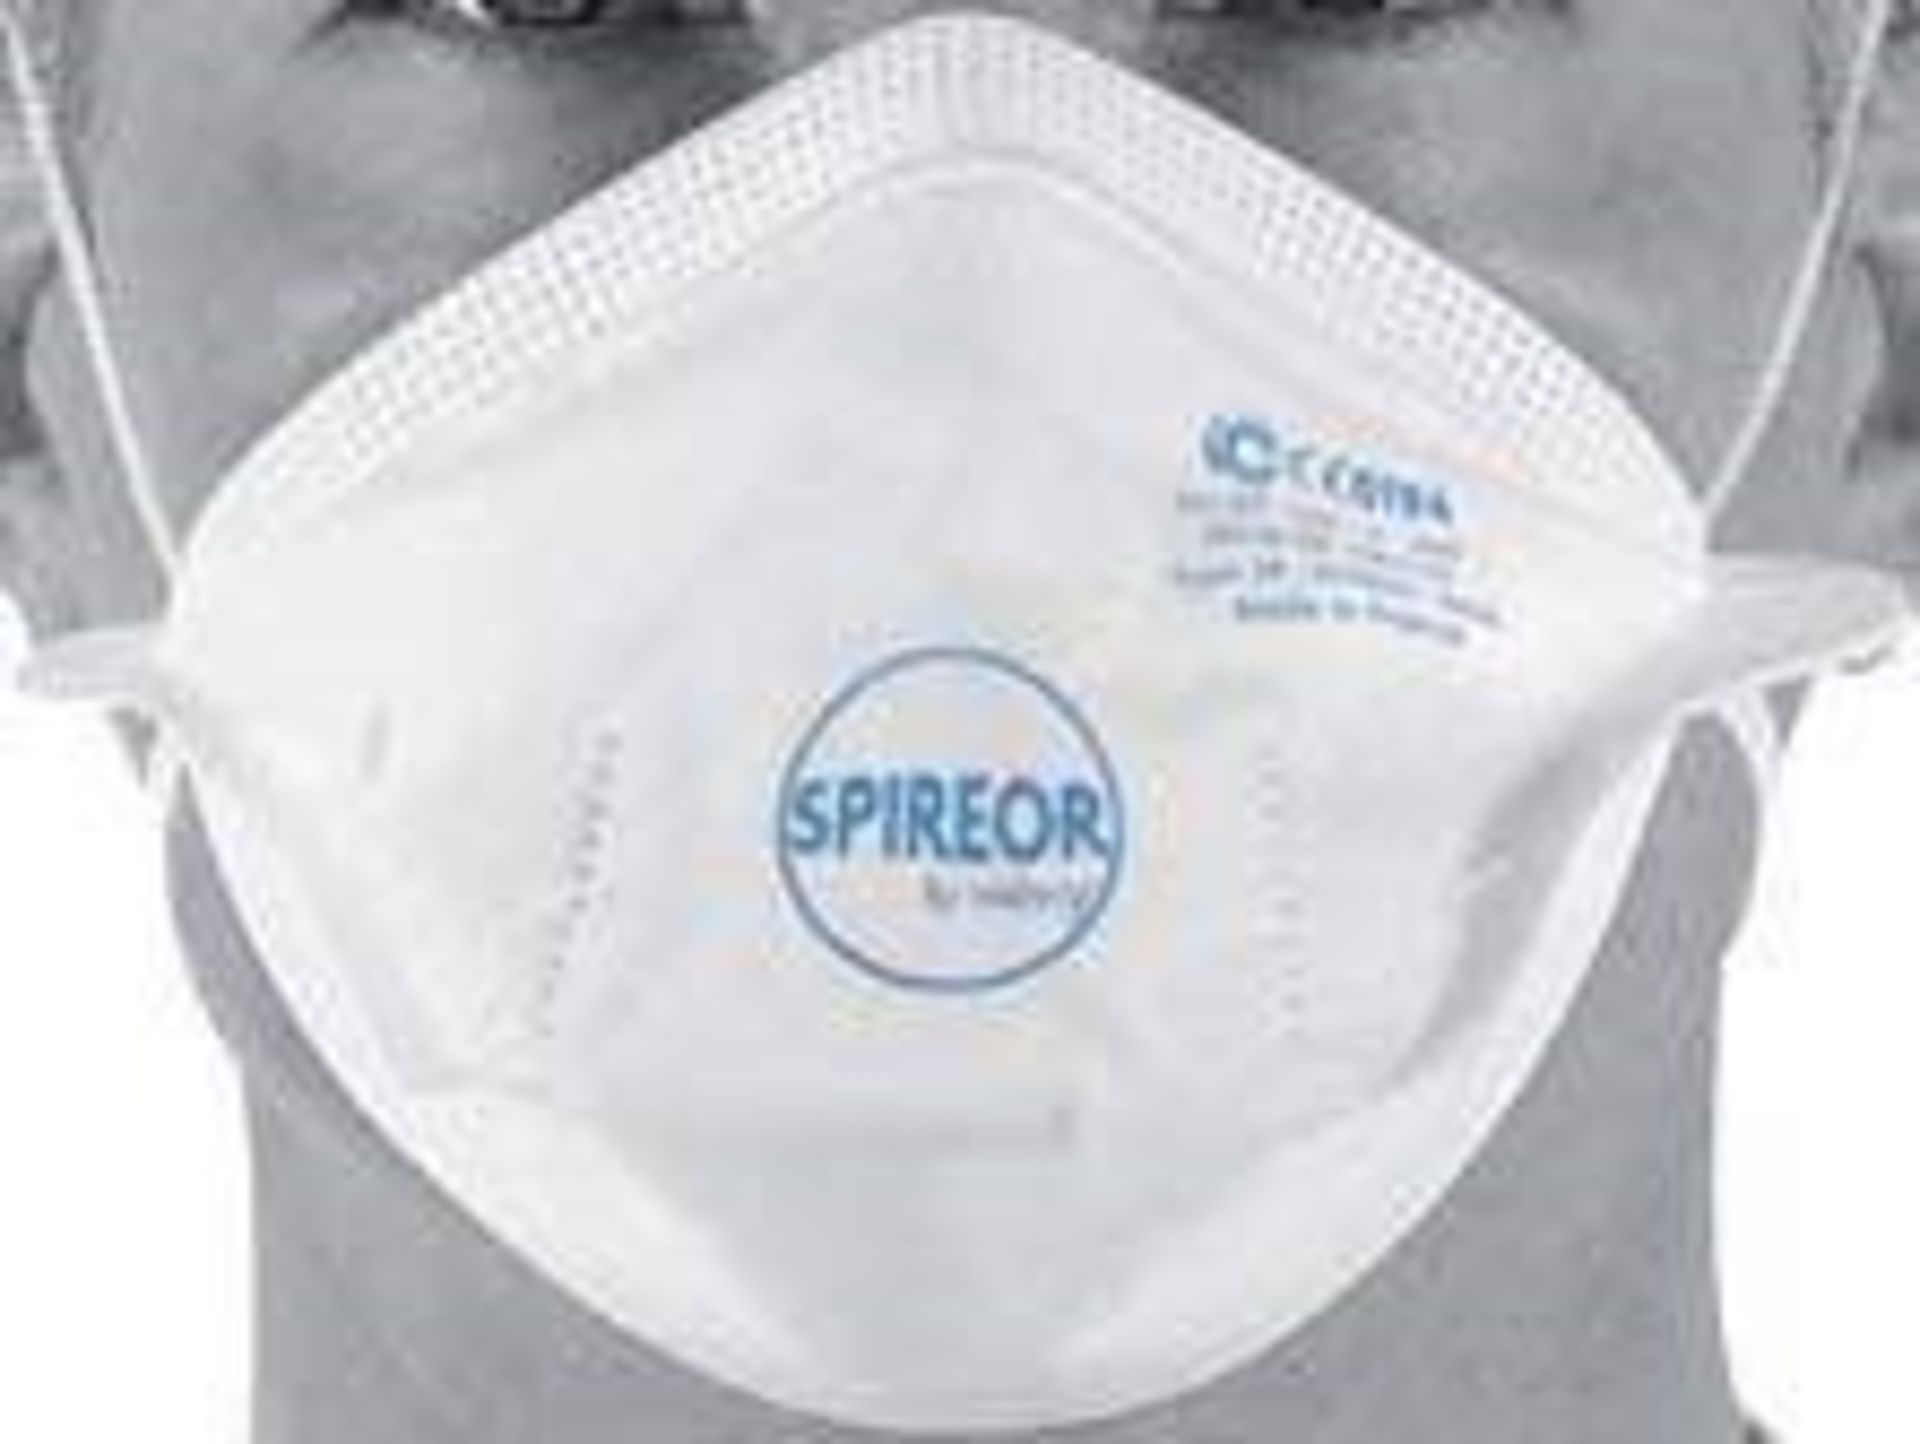 1,000 x Valmy Spireor Resparitory FFP3 Face Masks - NHS Approved - Stock Code VSP352TF-07C - New - Image 4 of 7